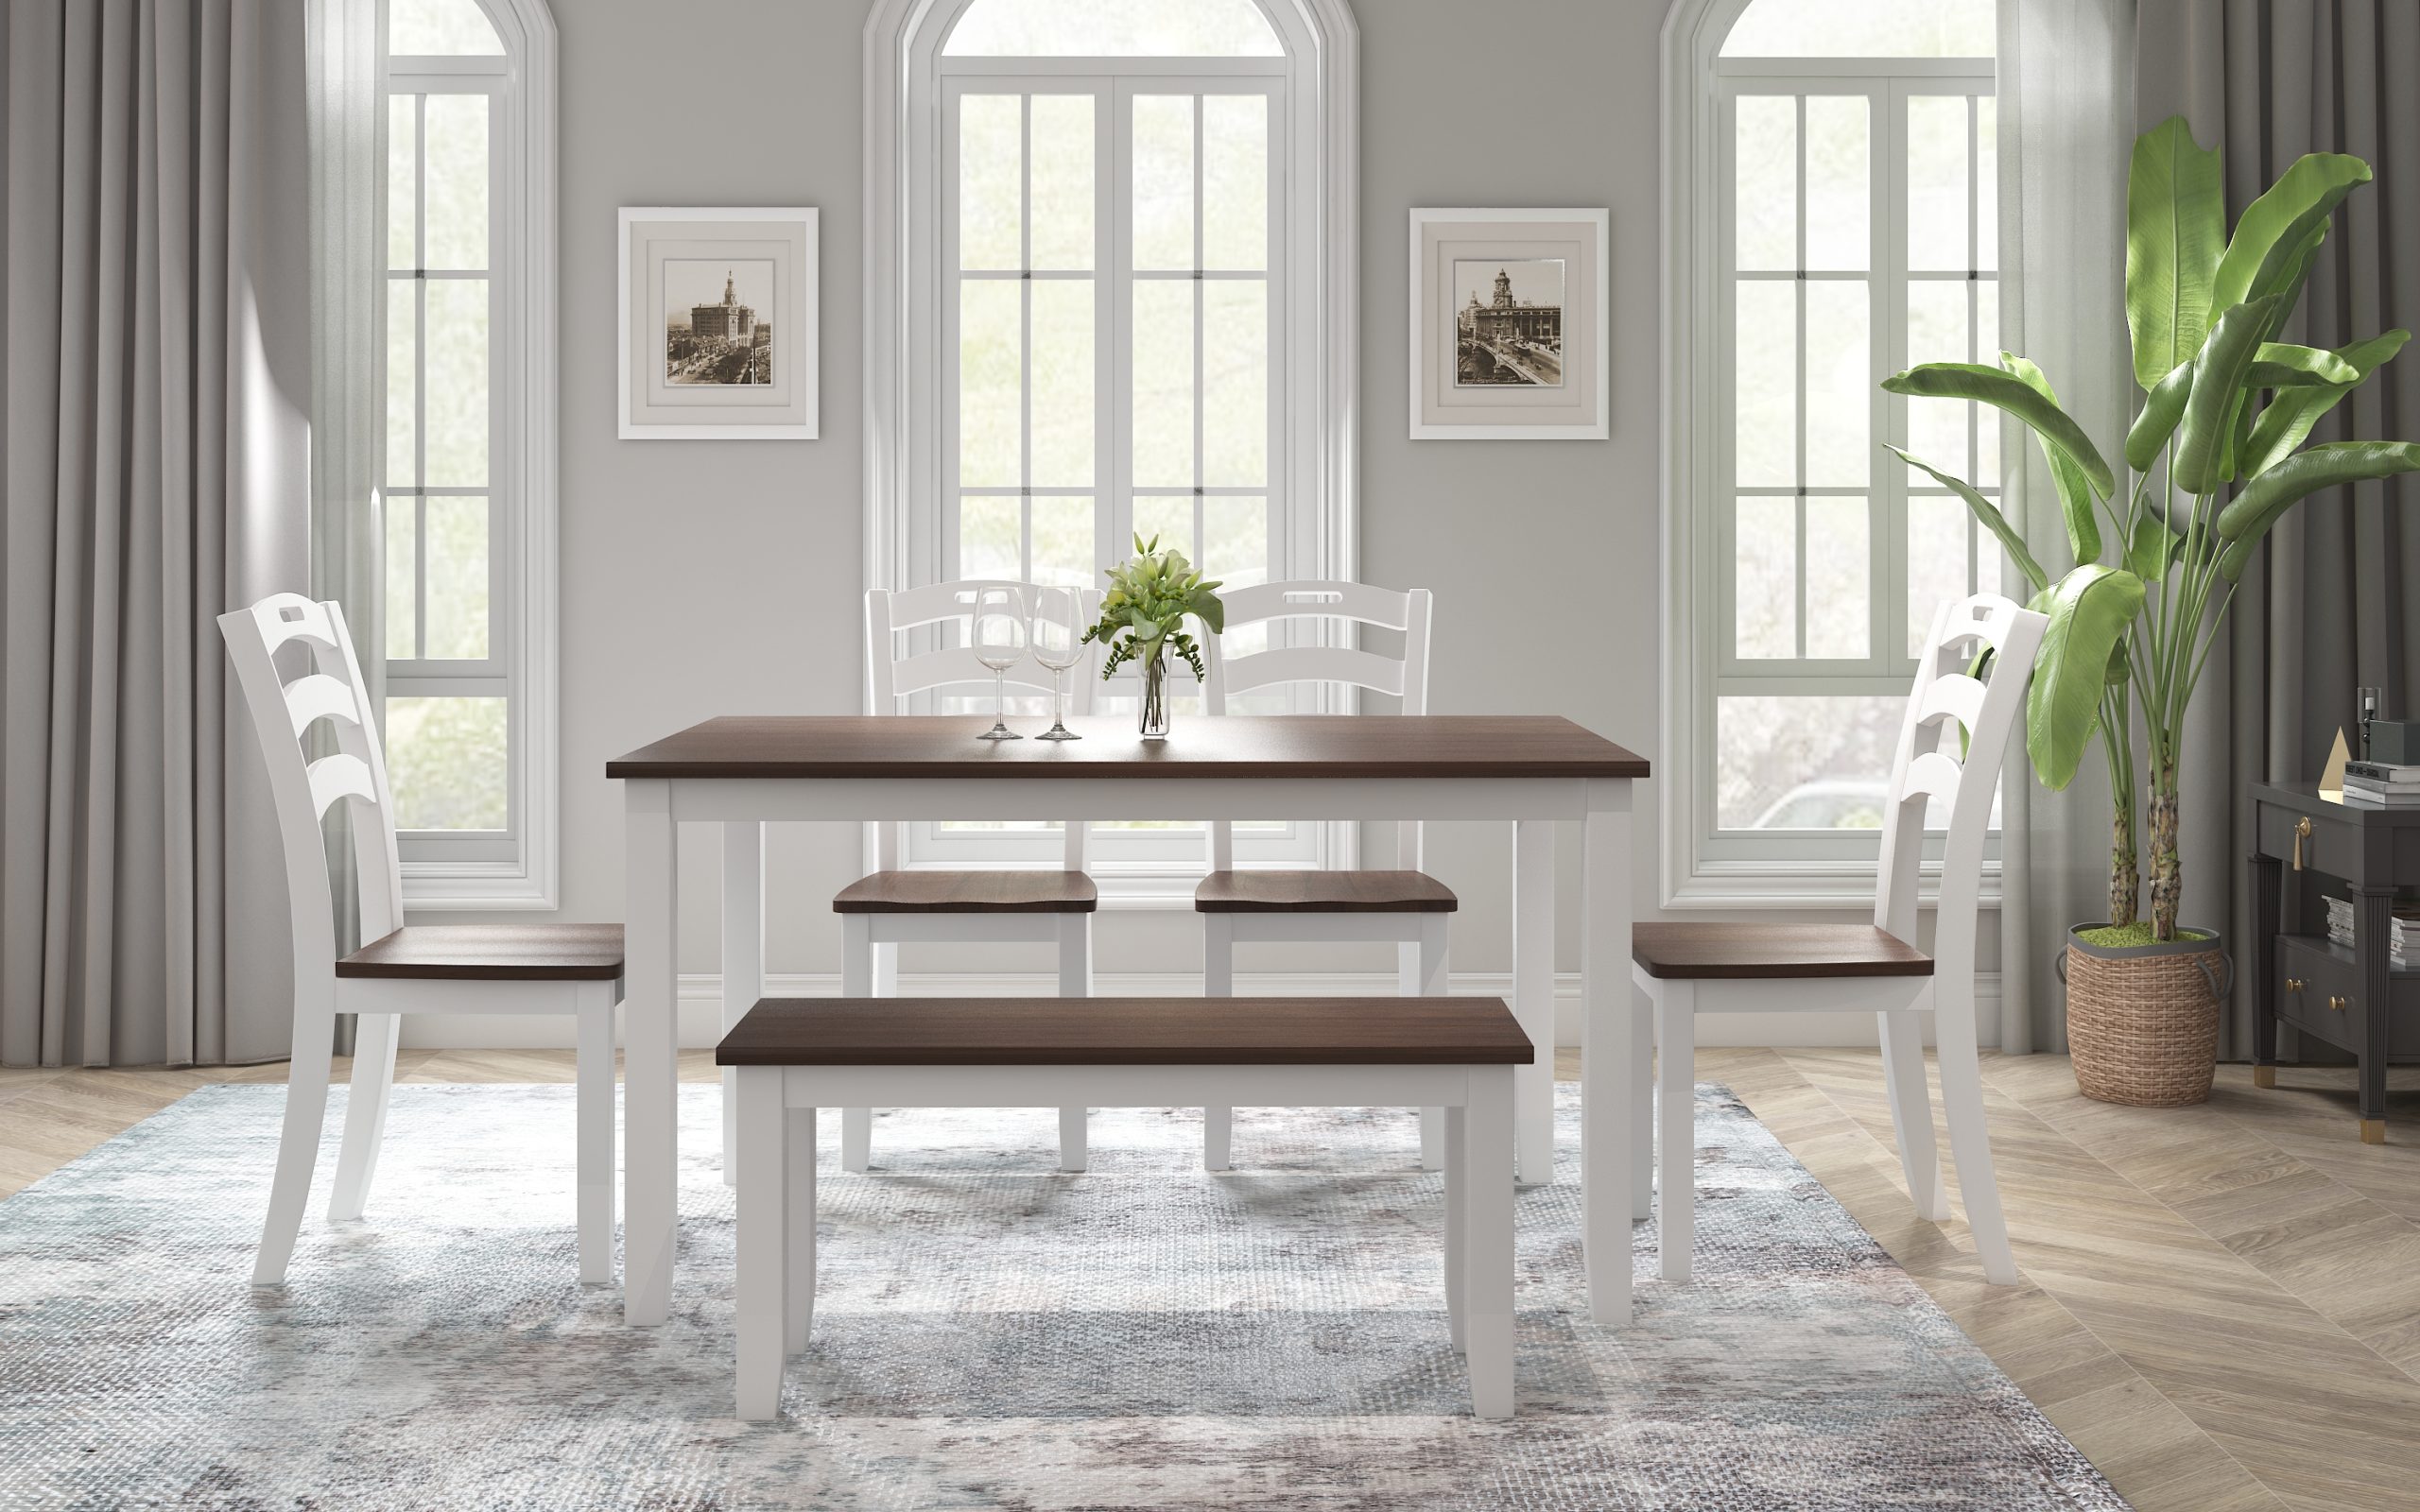 6 Piece Dining Table Set With Bench, Table Set